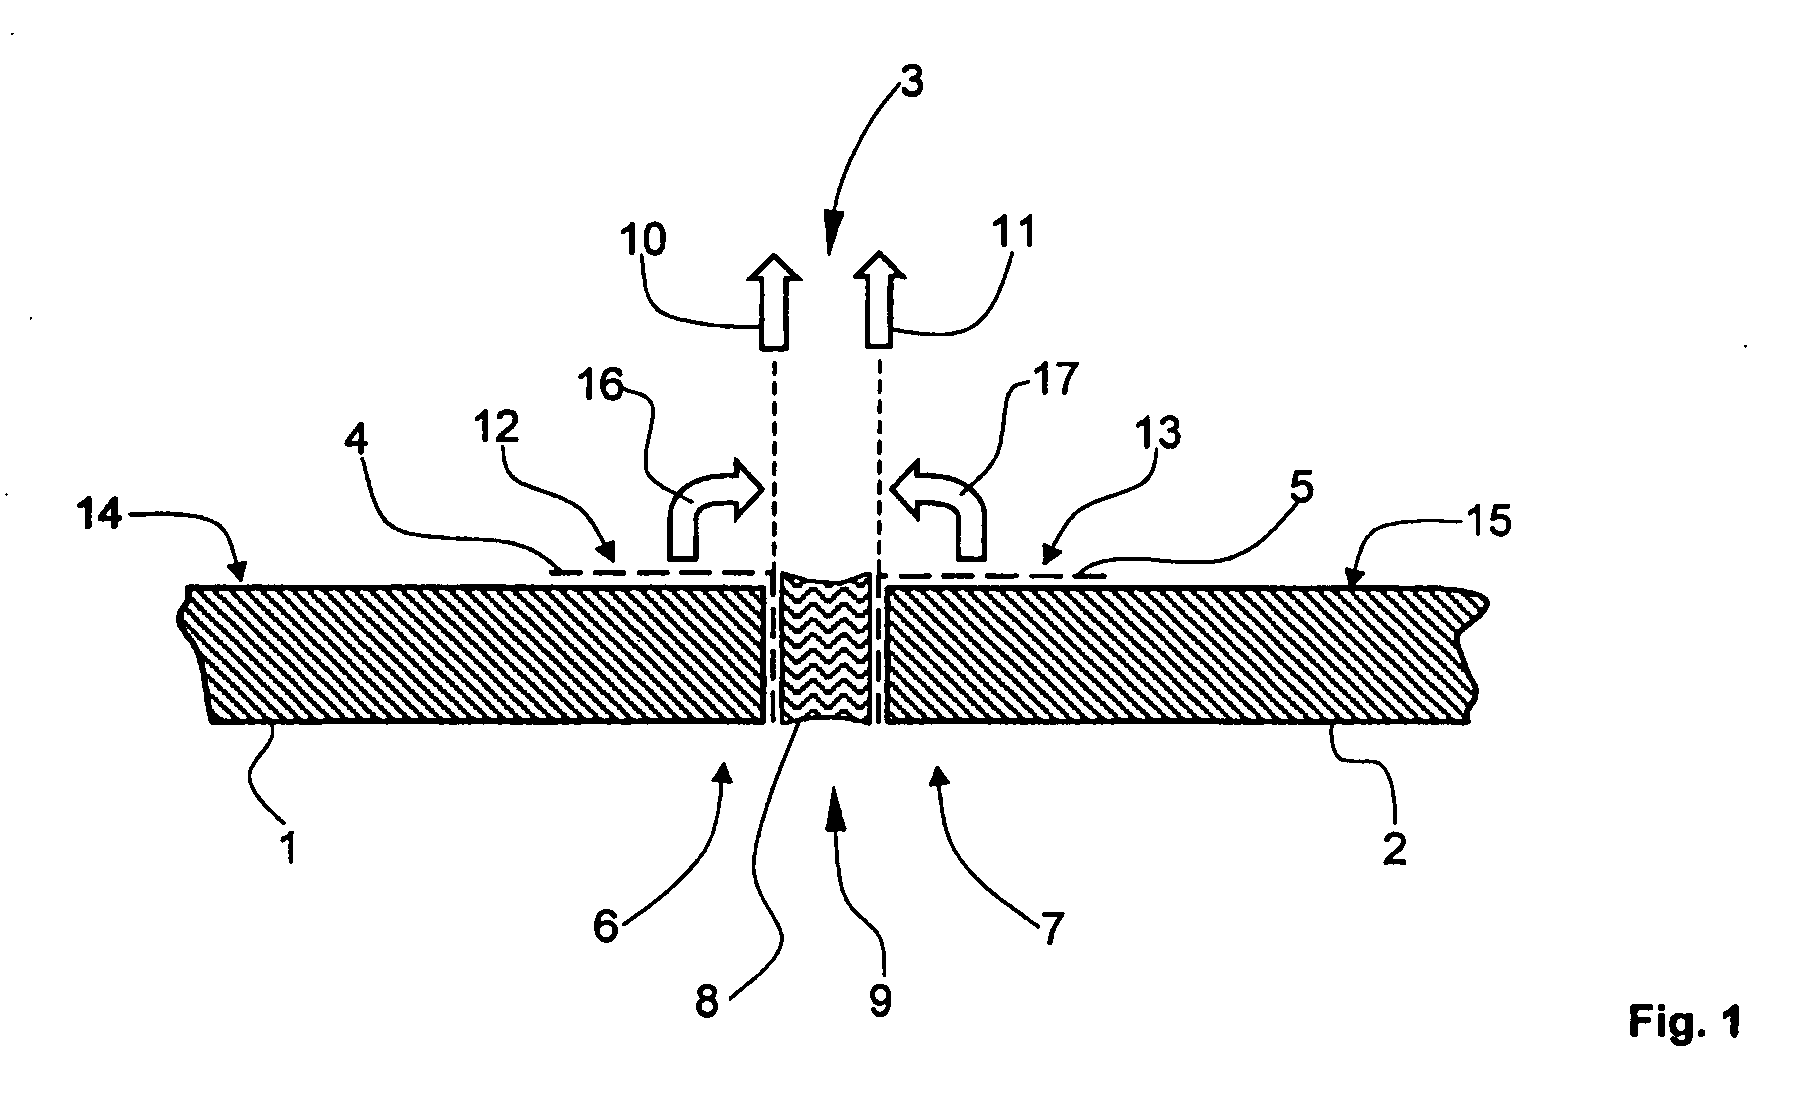 Method for Producing a Releasable Seal With a Sealing Compound and Use of Adhesive Strips for Carrying Out the Method